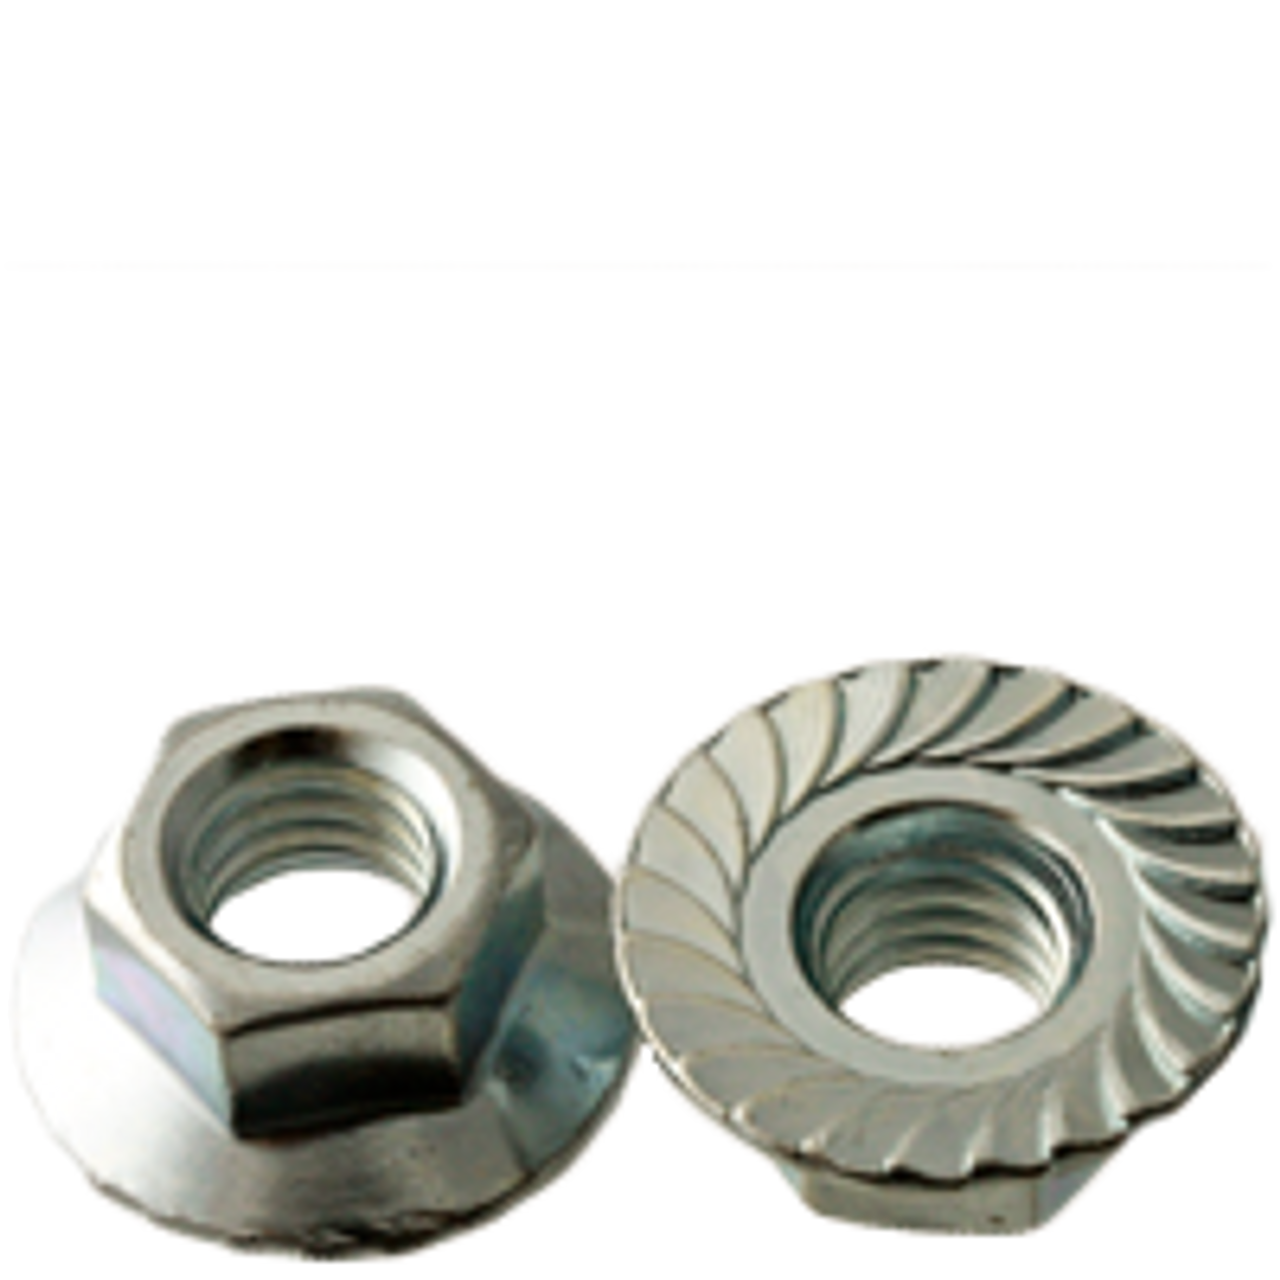 Flange Nuts Serrated Lock Nuts Zinc Plated Steel Flange Nut All Sizes & QTYs 